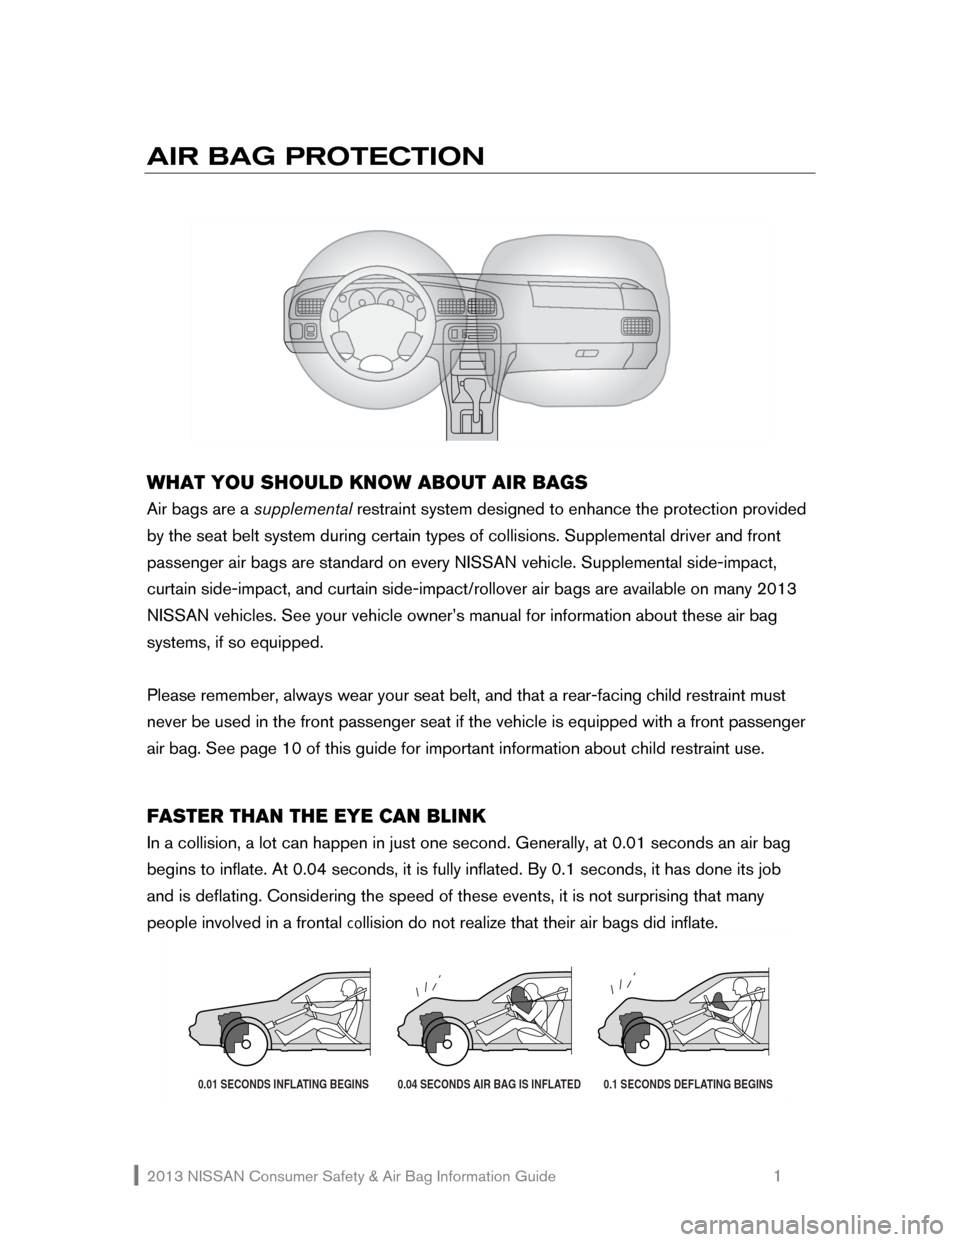 NISSAN ROGUE 2013 2.G Consumer Safety Air Bag Information Guide 2013 NISSAN Consumer Safety & Air Bag Information Guide                                                   1 
AIR BAG PROTECTION 
    
 
 
WHAT YOU SHOULD KNOW ABOUT AIR BAGS 
Air bags are a supplement